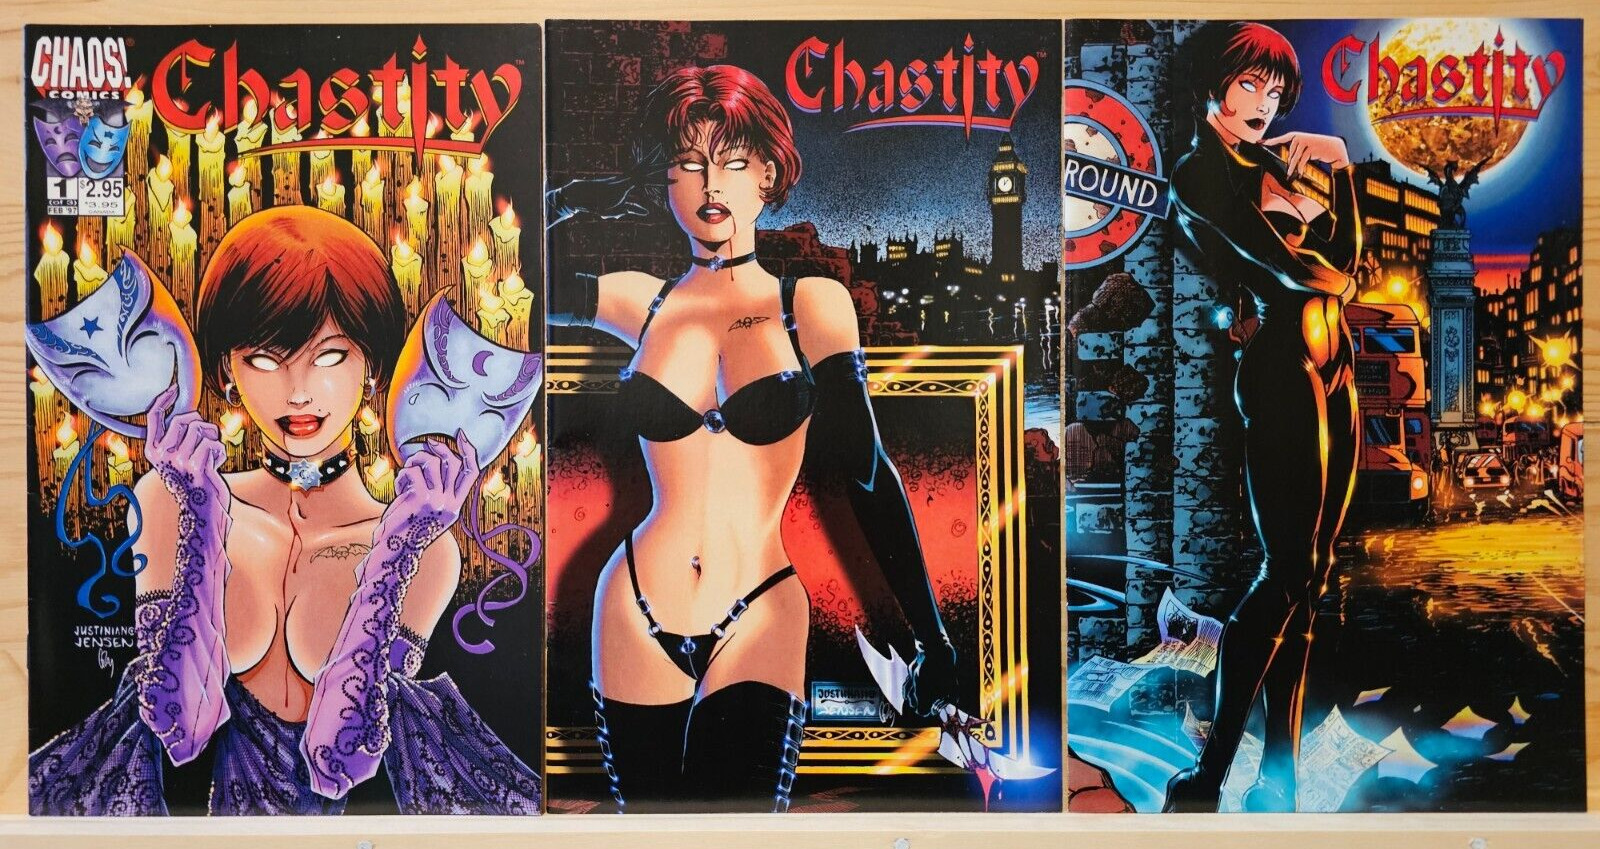 Chastity: Theatre of Pain #1-3 Chaos Comics 1997 Complete